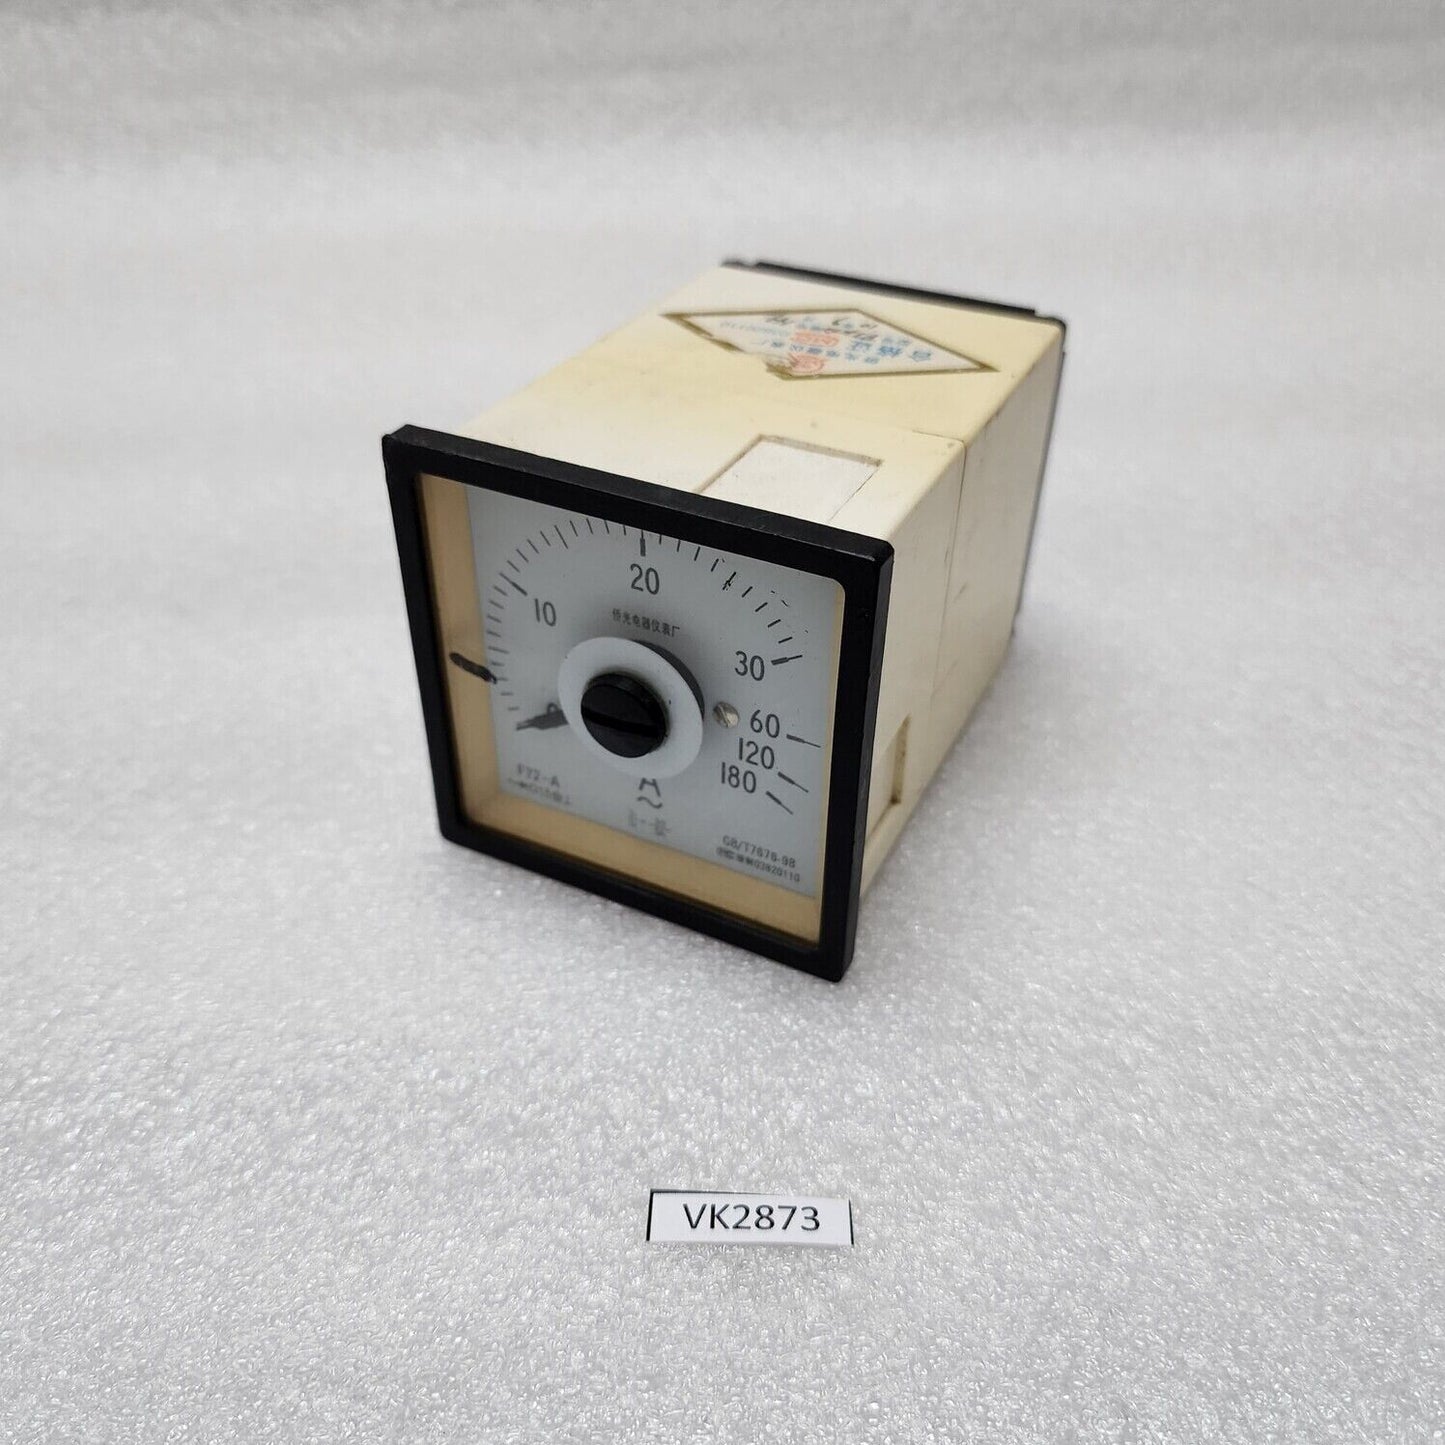 QIAOGUANG ELECTRICAL INSTRUMENT F72-A AMMETER